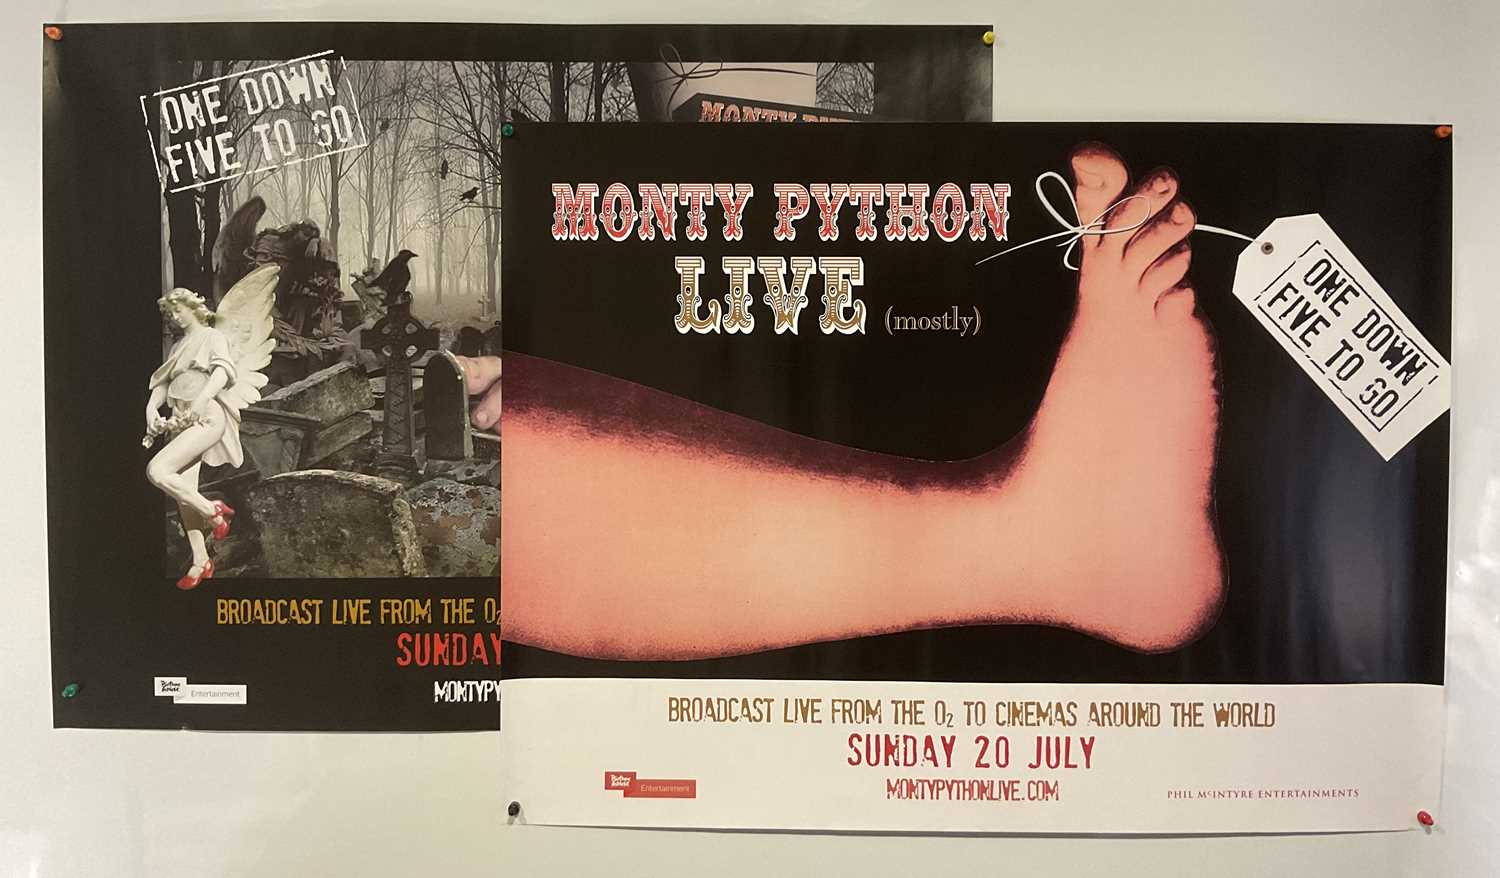 MONTY PYTHON LIVE (MOSTLY) (2014) 2 UK Quad double-sided film posters, two different styles, artwork